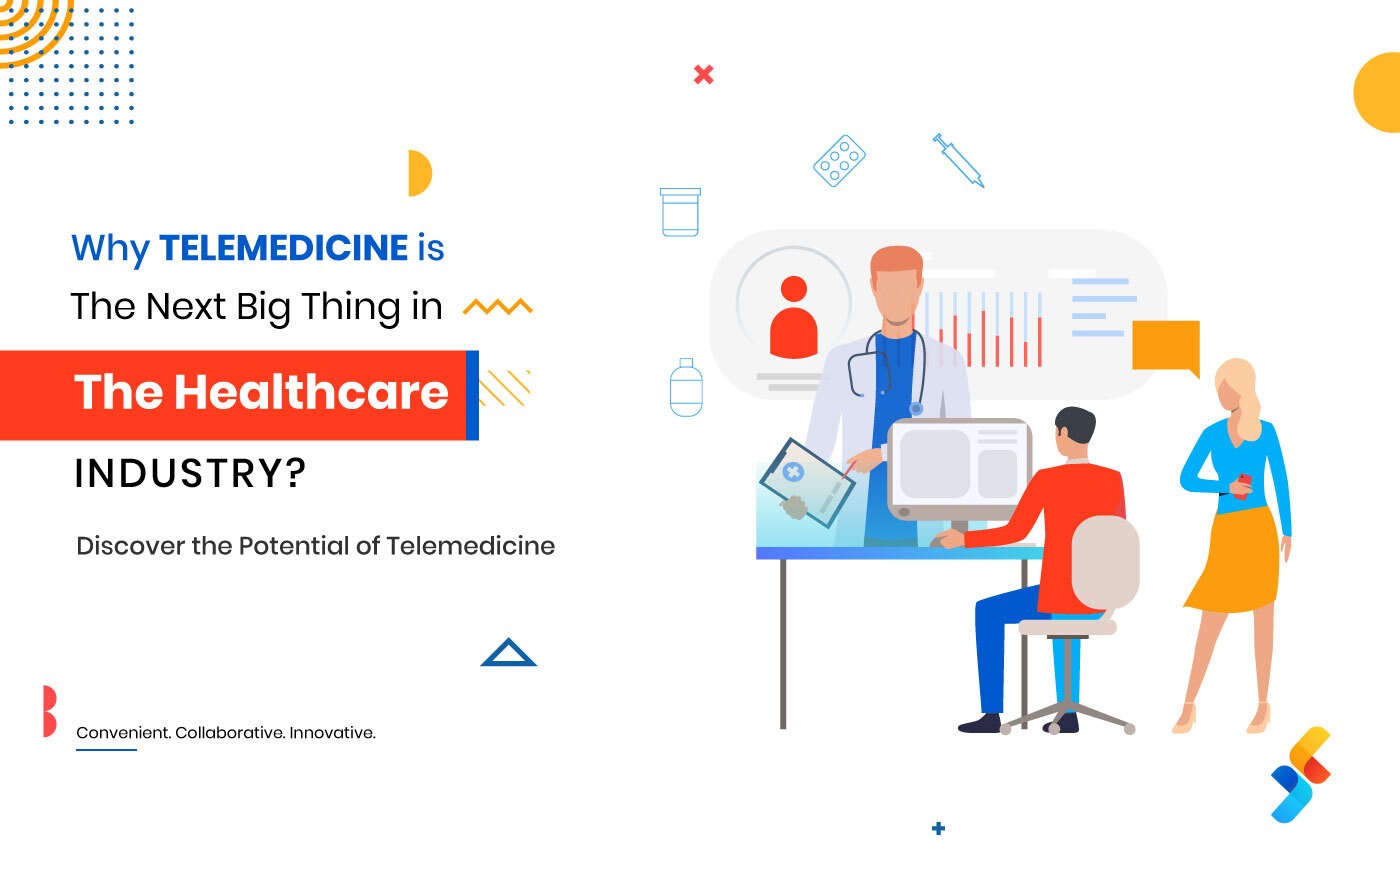 Why Telemedicine is the Next Big Thing in the Healthcare Industry?